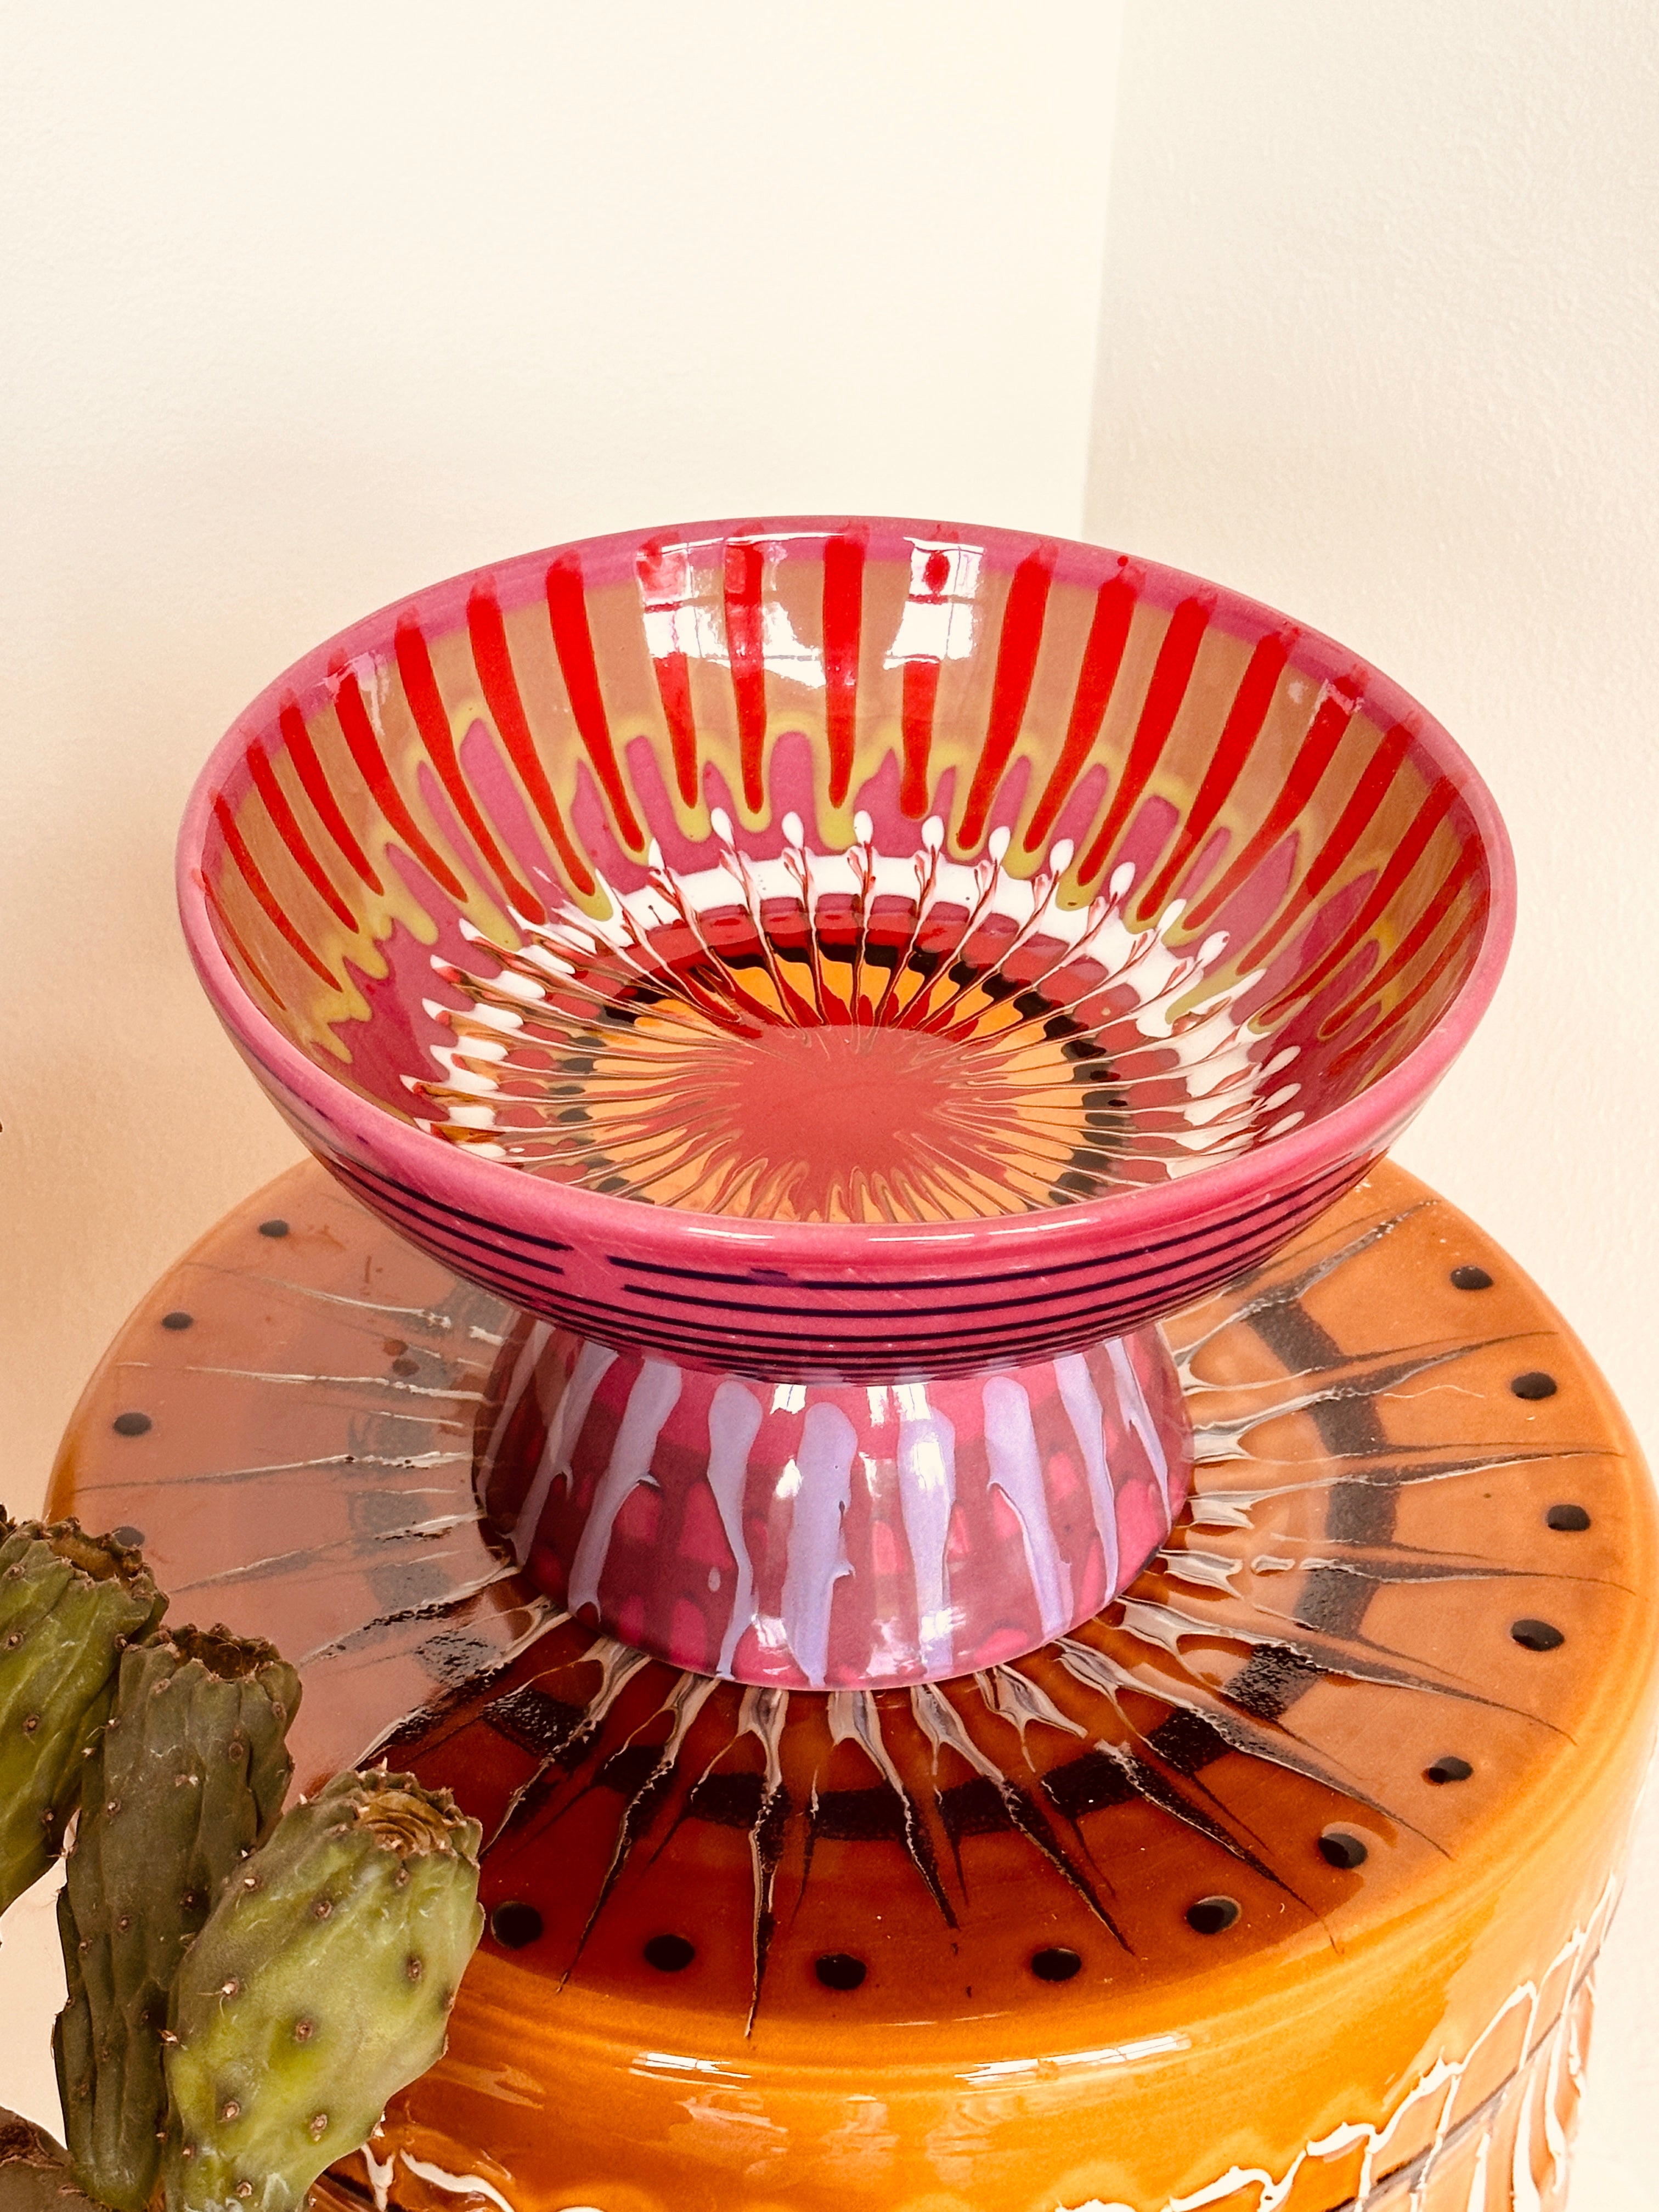 Psychodelic High Bowl  "Fuxia with Amore Mio"